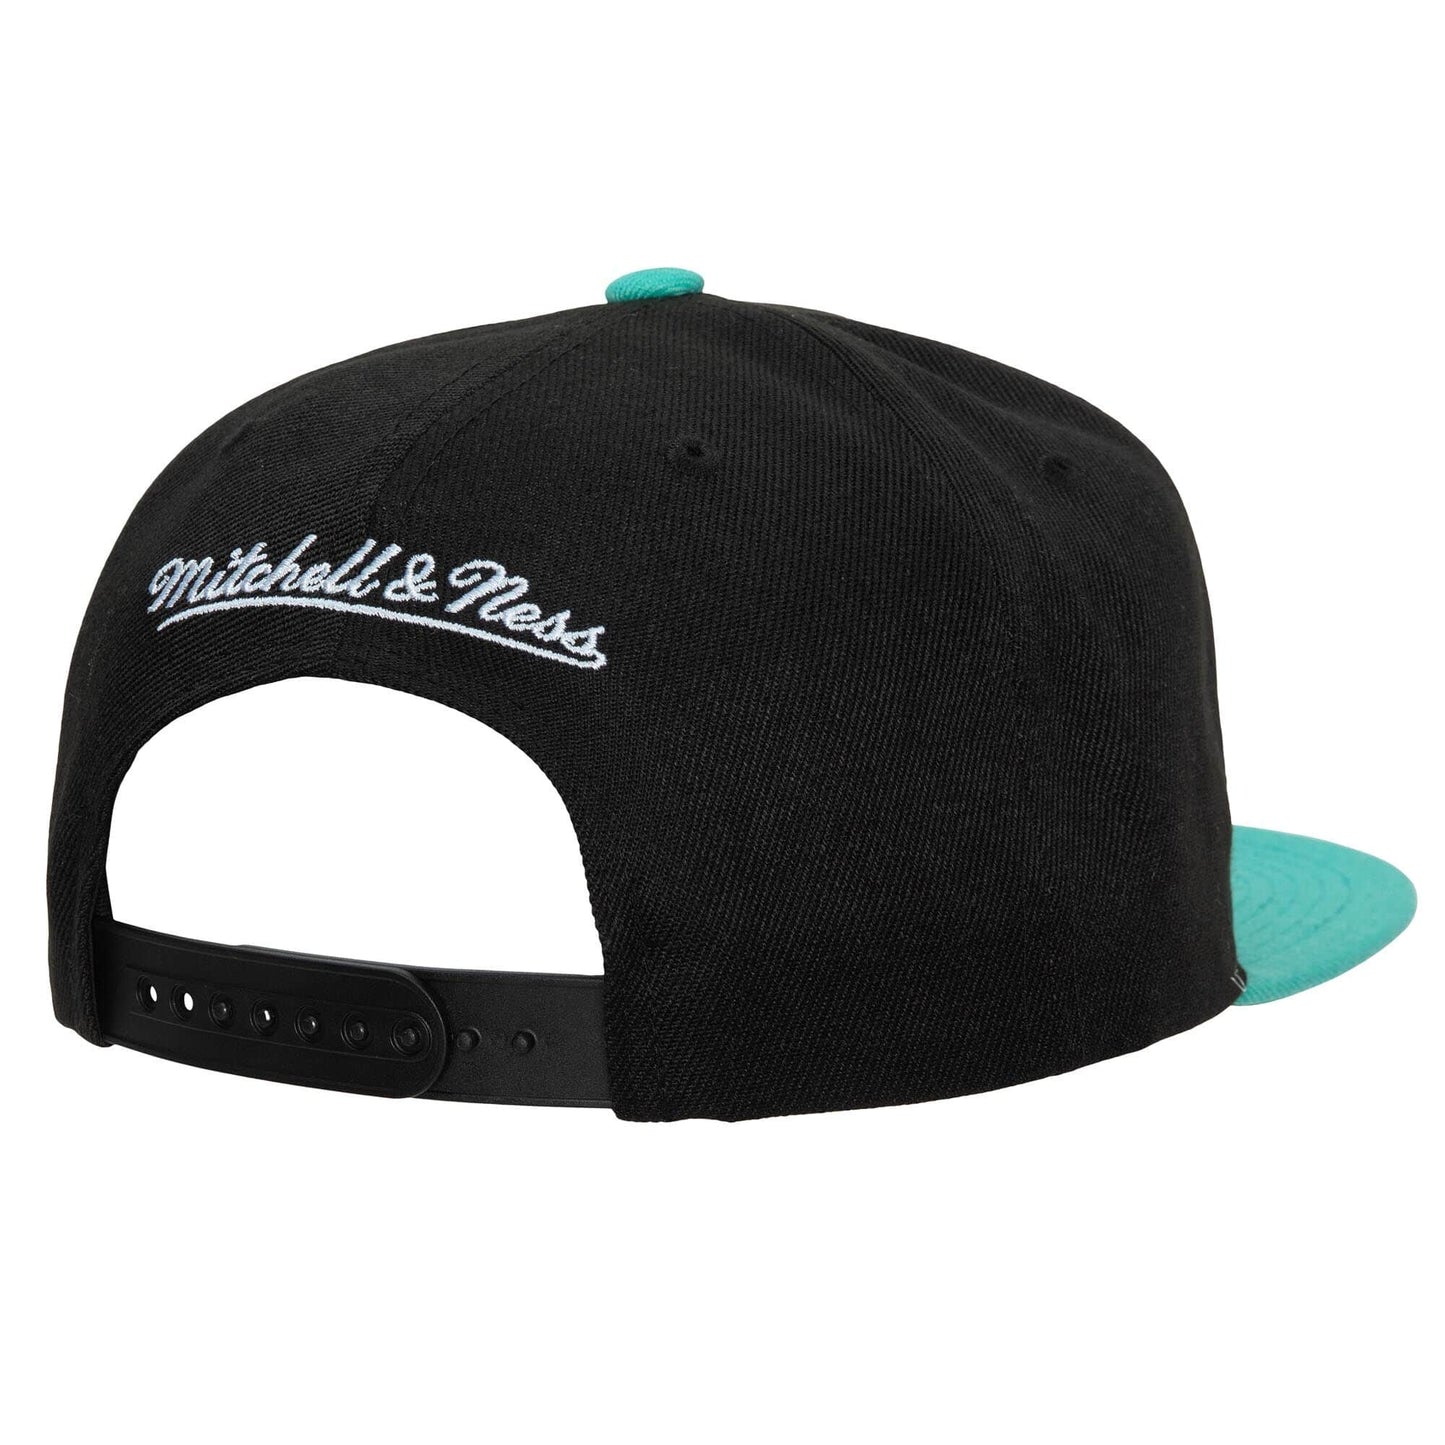 Men's Vancouver Grizzlies Mitchell & Ness 2 Tone Black and Teal Low Big Face Hardwood Classics Snapback Hat